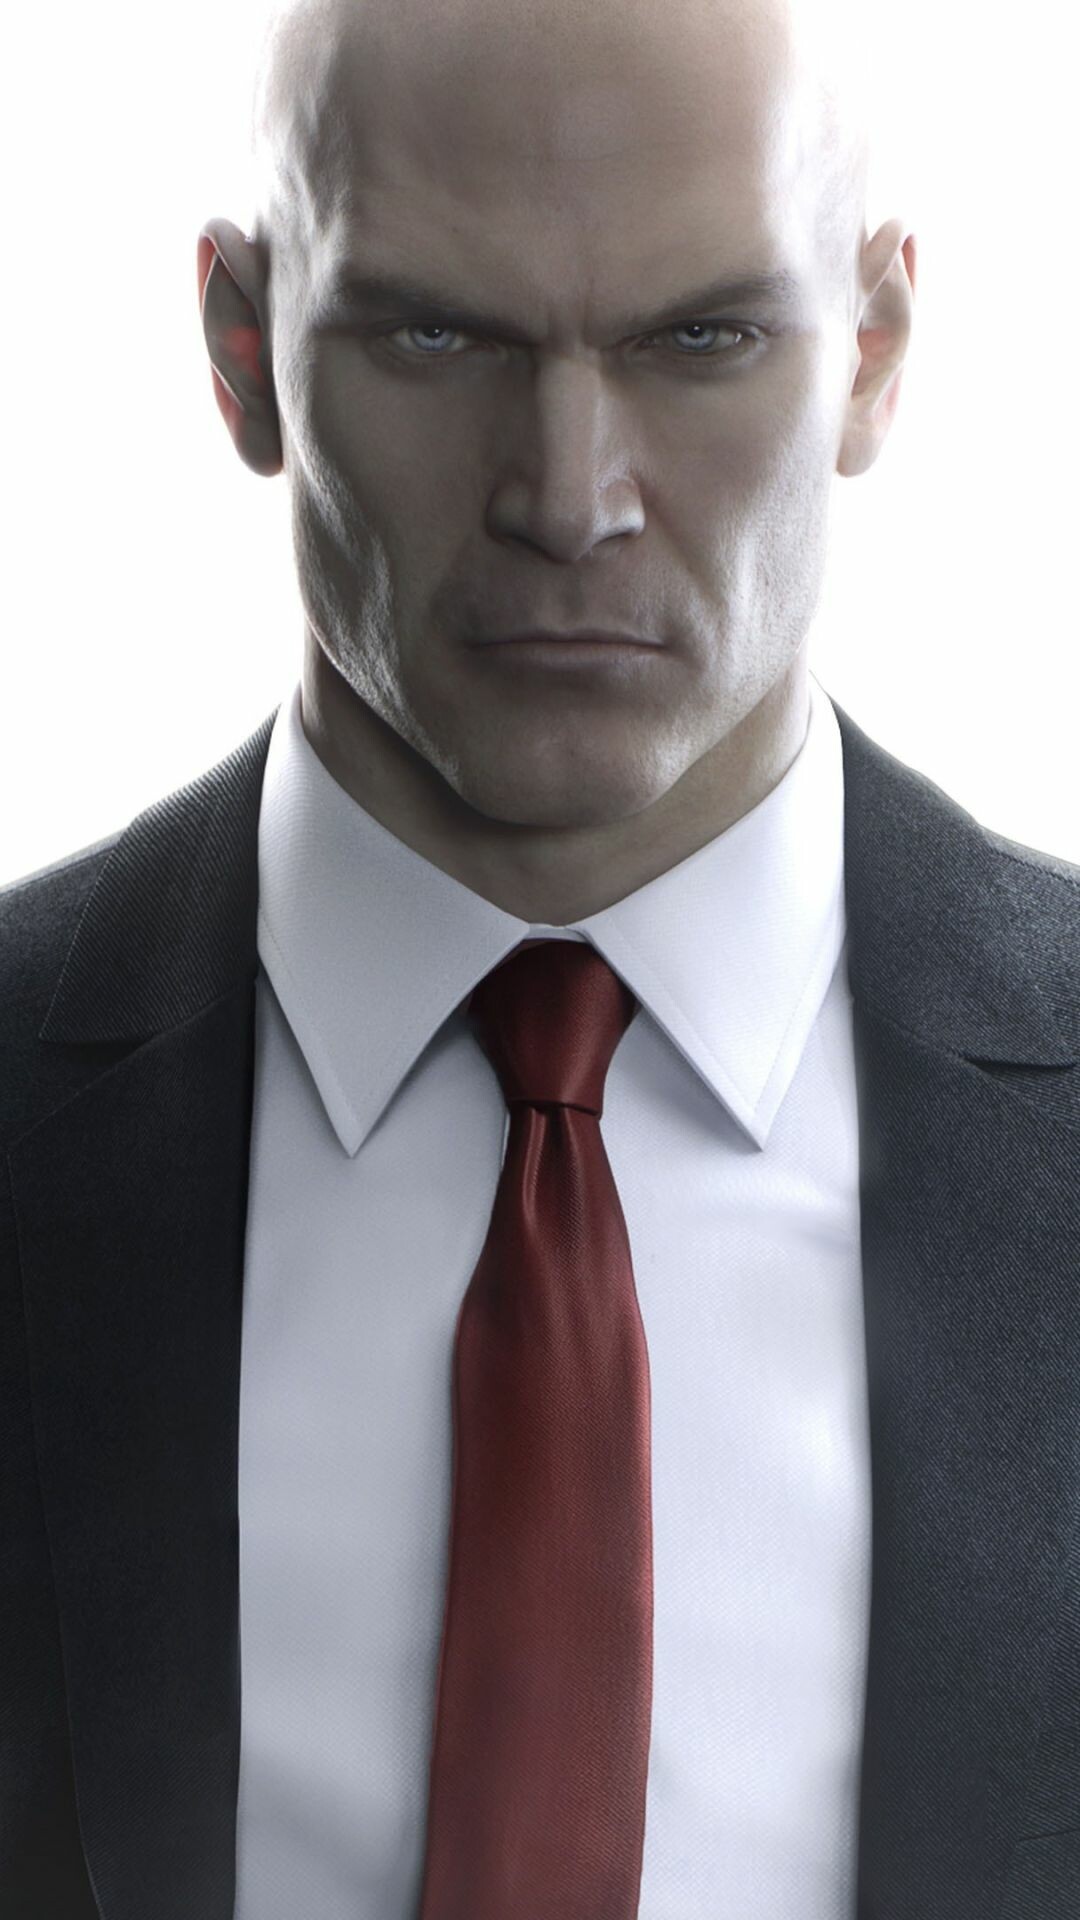 Hitman (Game): Agent 47, Voiced by actor David Bateson. 1080x1920 Full HD Wallpaper.